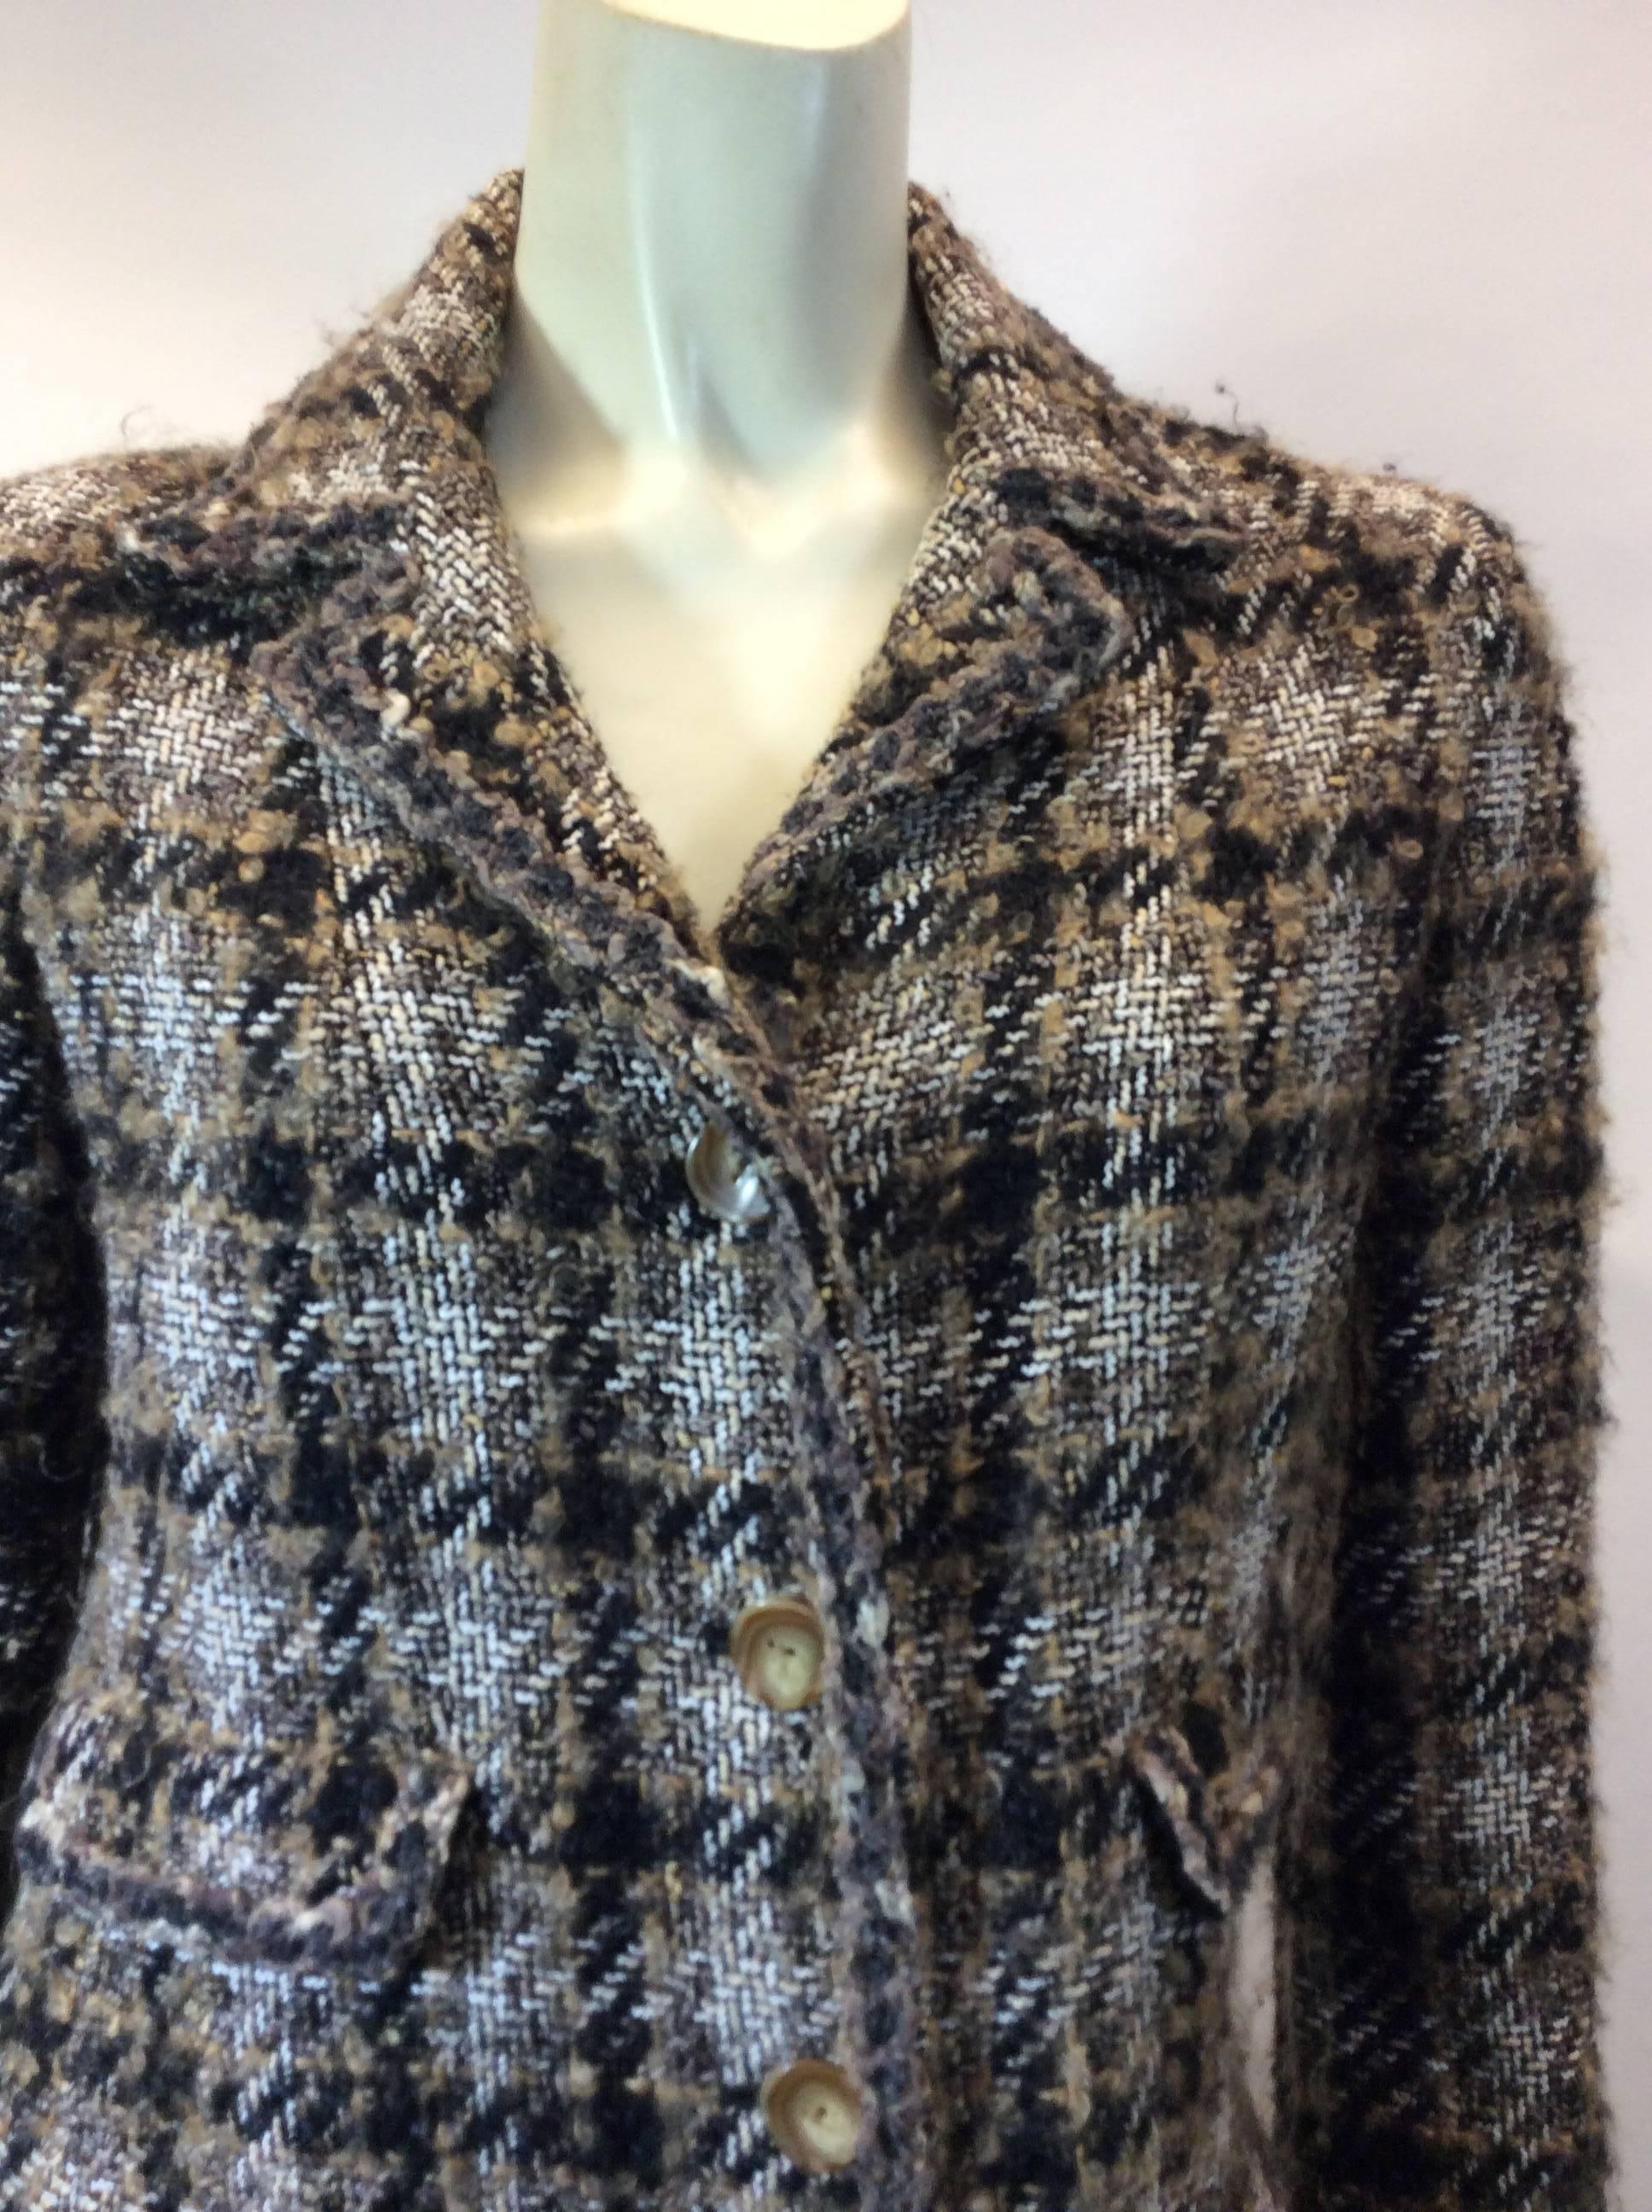 Chanel Brown Tweed Blazer
Size 38 
Wool, silk, rayon, mohair
$1200
Made in France
Fully lined interior